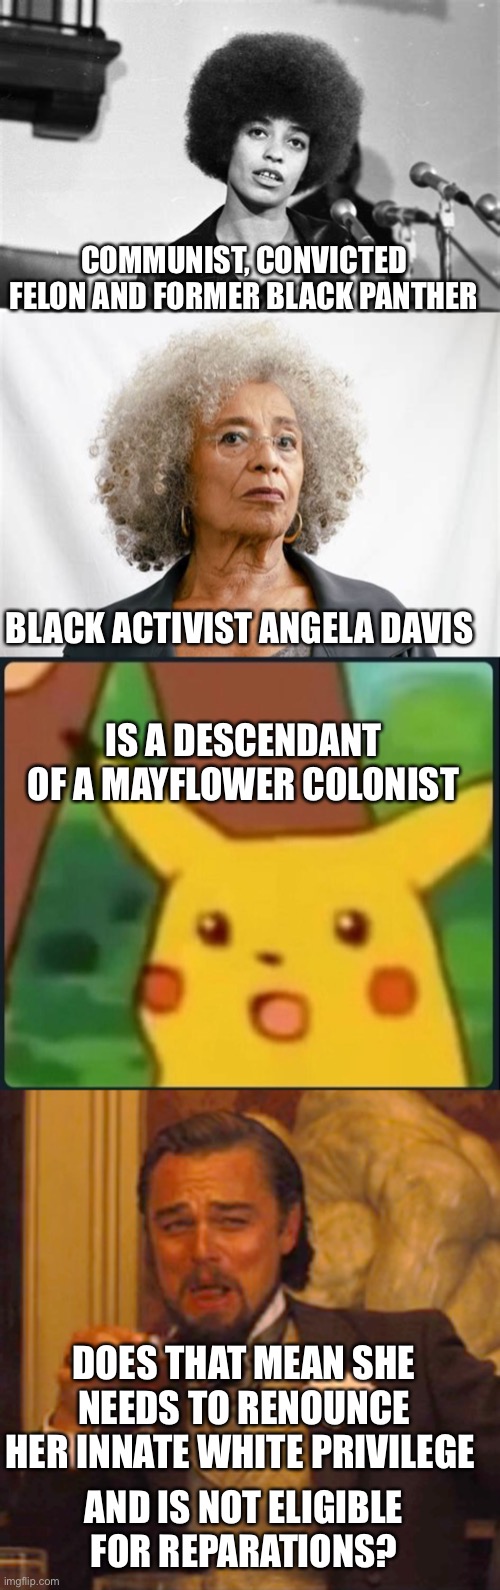 Sign her up for CRT training! | COMMUNIST, CONVICTED FELON AND FORMER BLACK PANTHER; BLACK ACTIVIST ANGELA DAVIS; IS A DESCENDANT OF A MAYFLOWER COLONIST; DOES THAT MEAN SHE NEEDS TO RENOUNCE HER INNATE WHITE PRIVILEGE; AND IS NOT ELIGIBLE FOR REPARATIONS? | image tagged in angela davis,mayflower descendant,white privilege | made w/ Imgflip meme maker